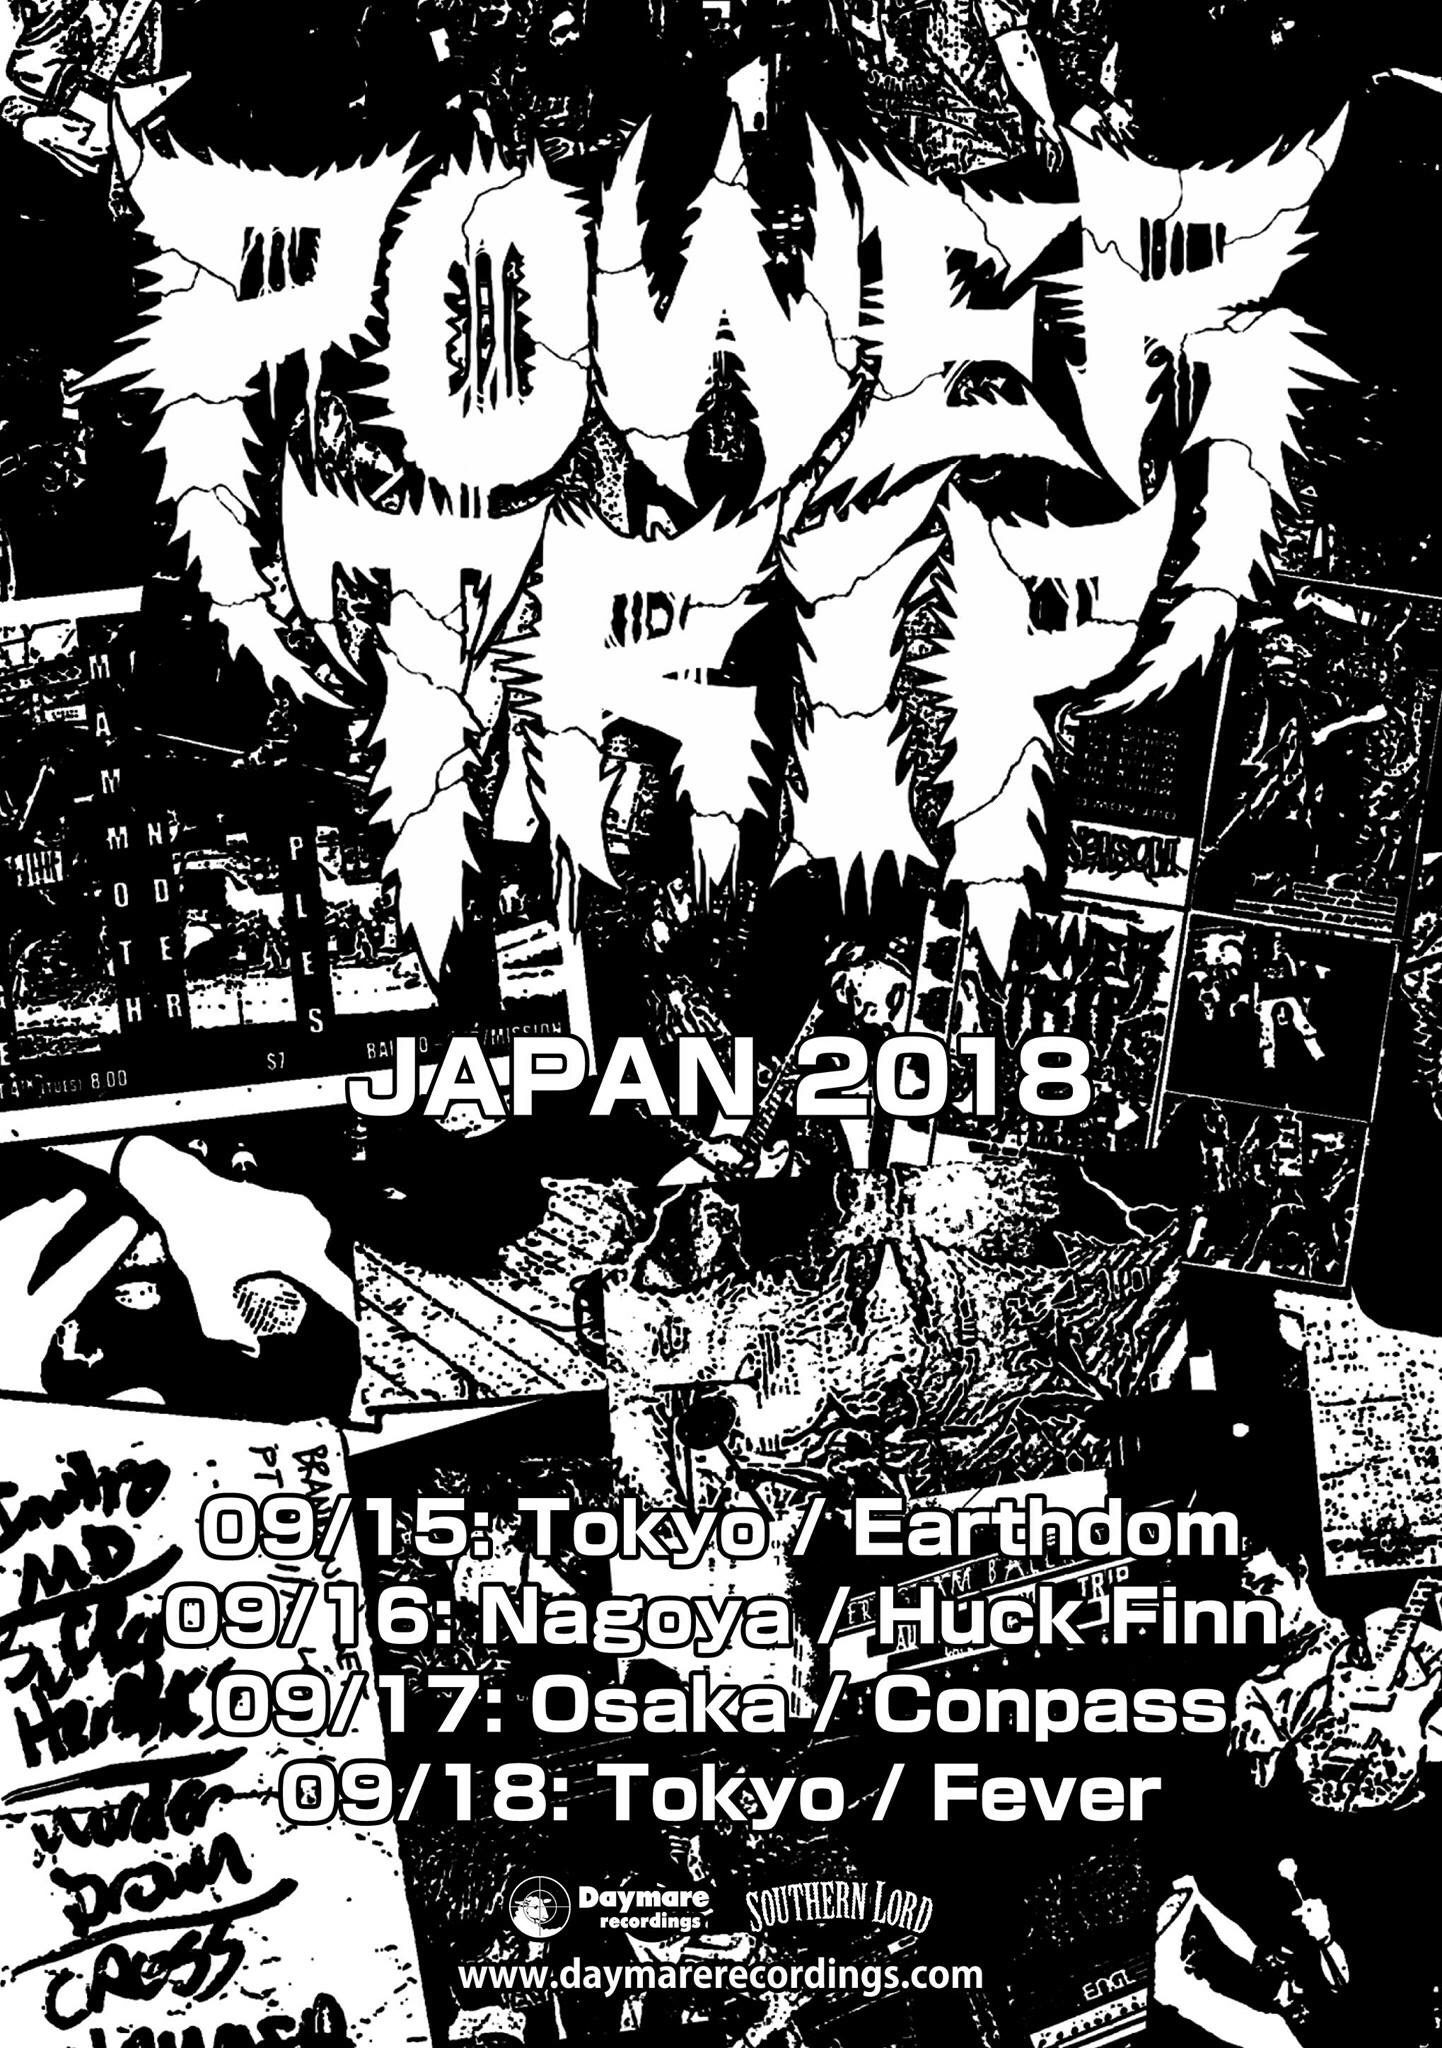 Trash Talk announce Japan tourdates with Japanese band Meaning - Unite Asia